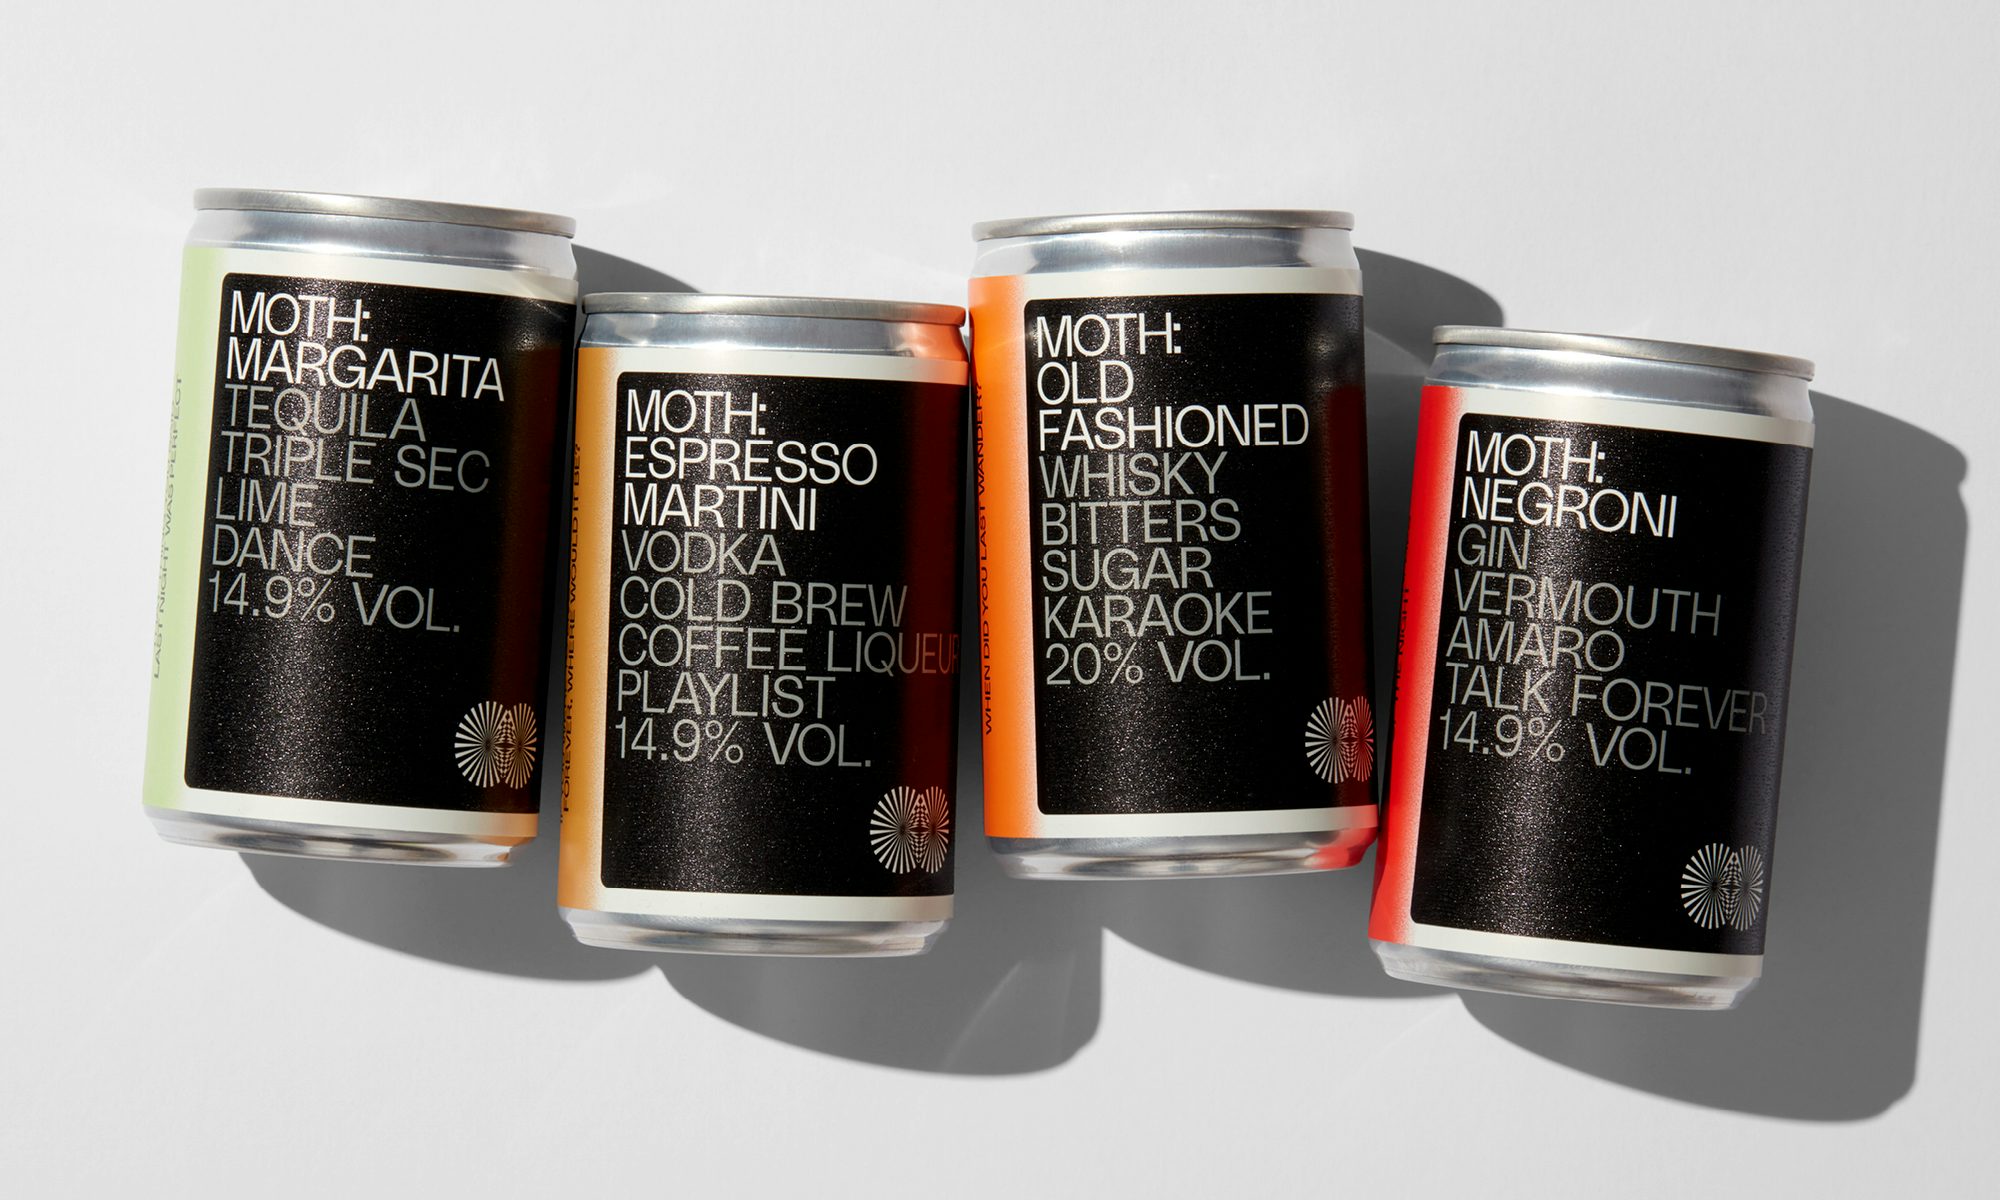 MOTH canned cocktails